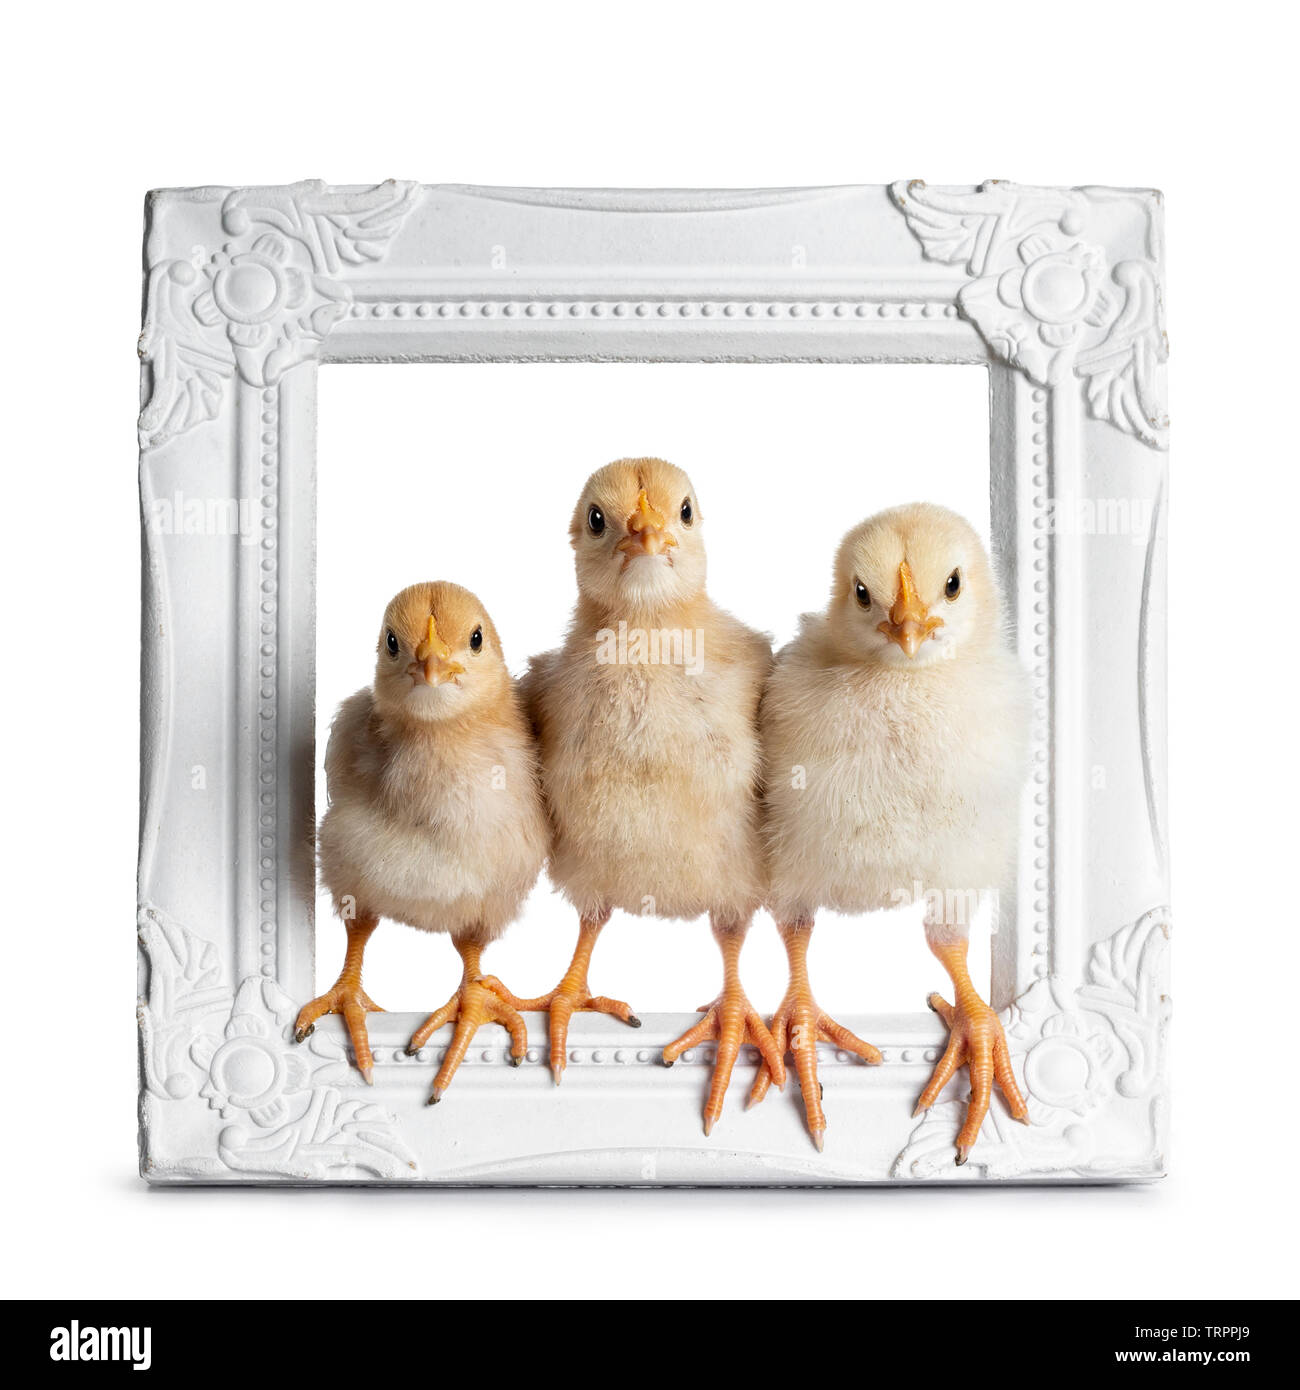 Group of 3 baby chicks sitting facing front in white photo frame. Isolated on white background. All looking at camera. Stock Photo